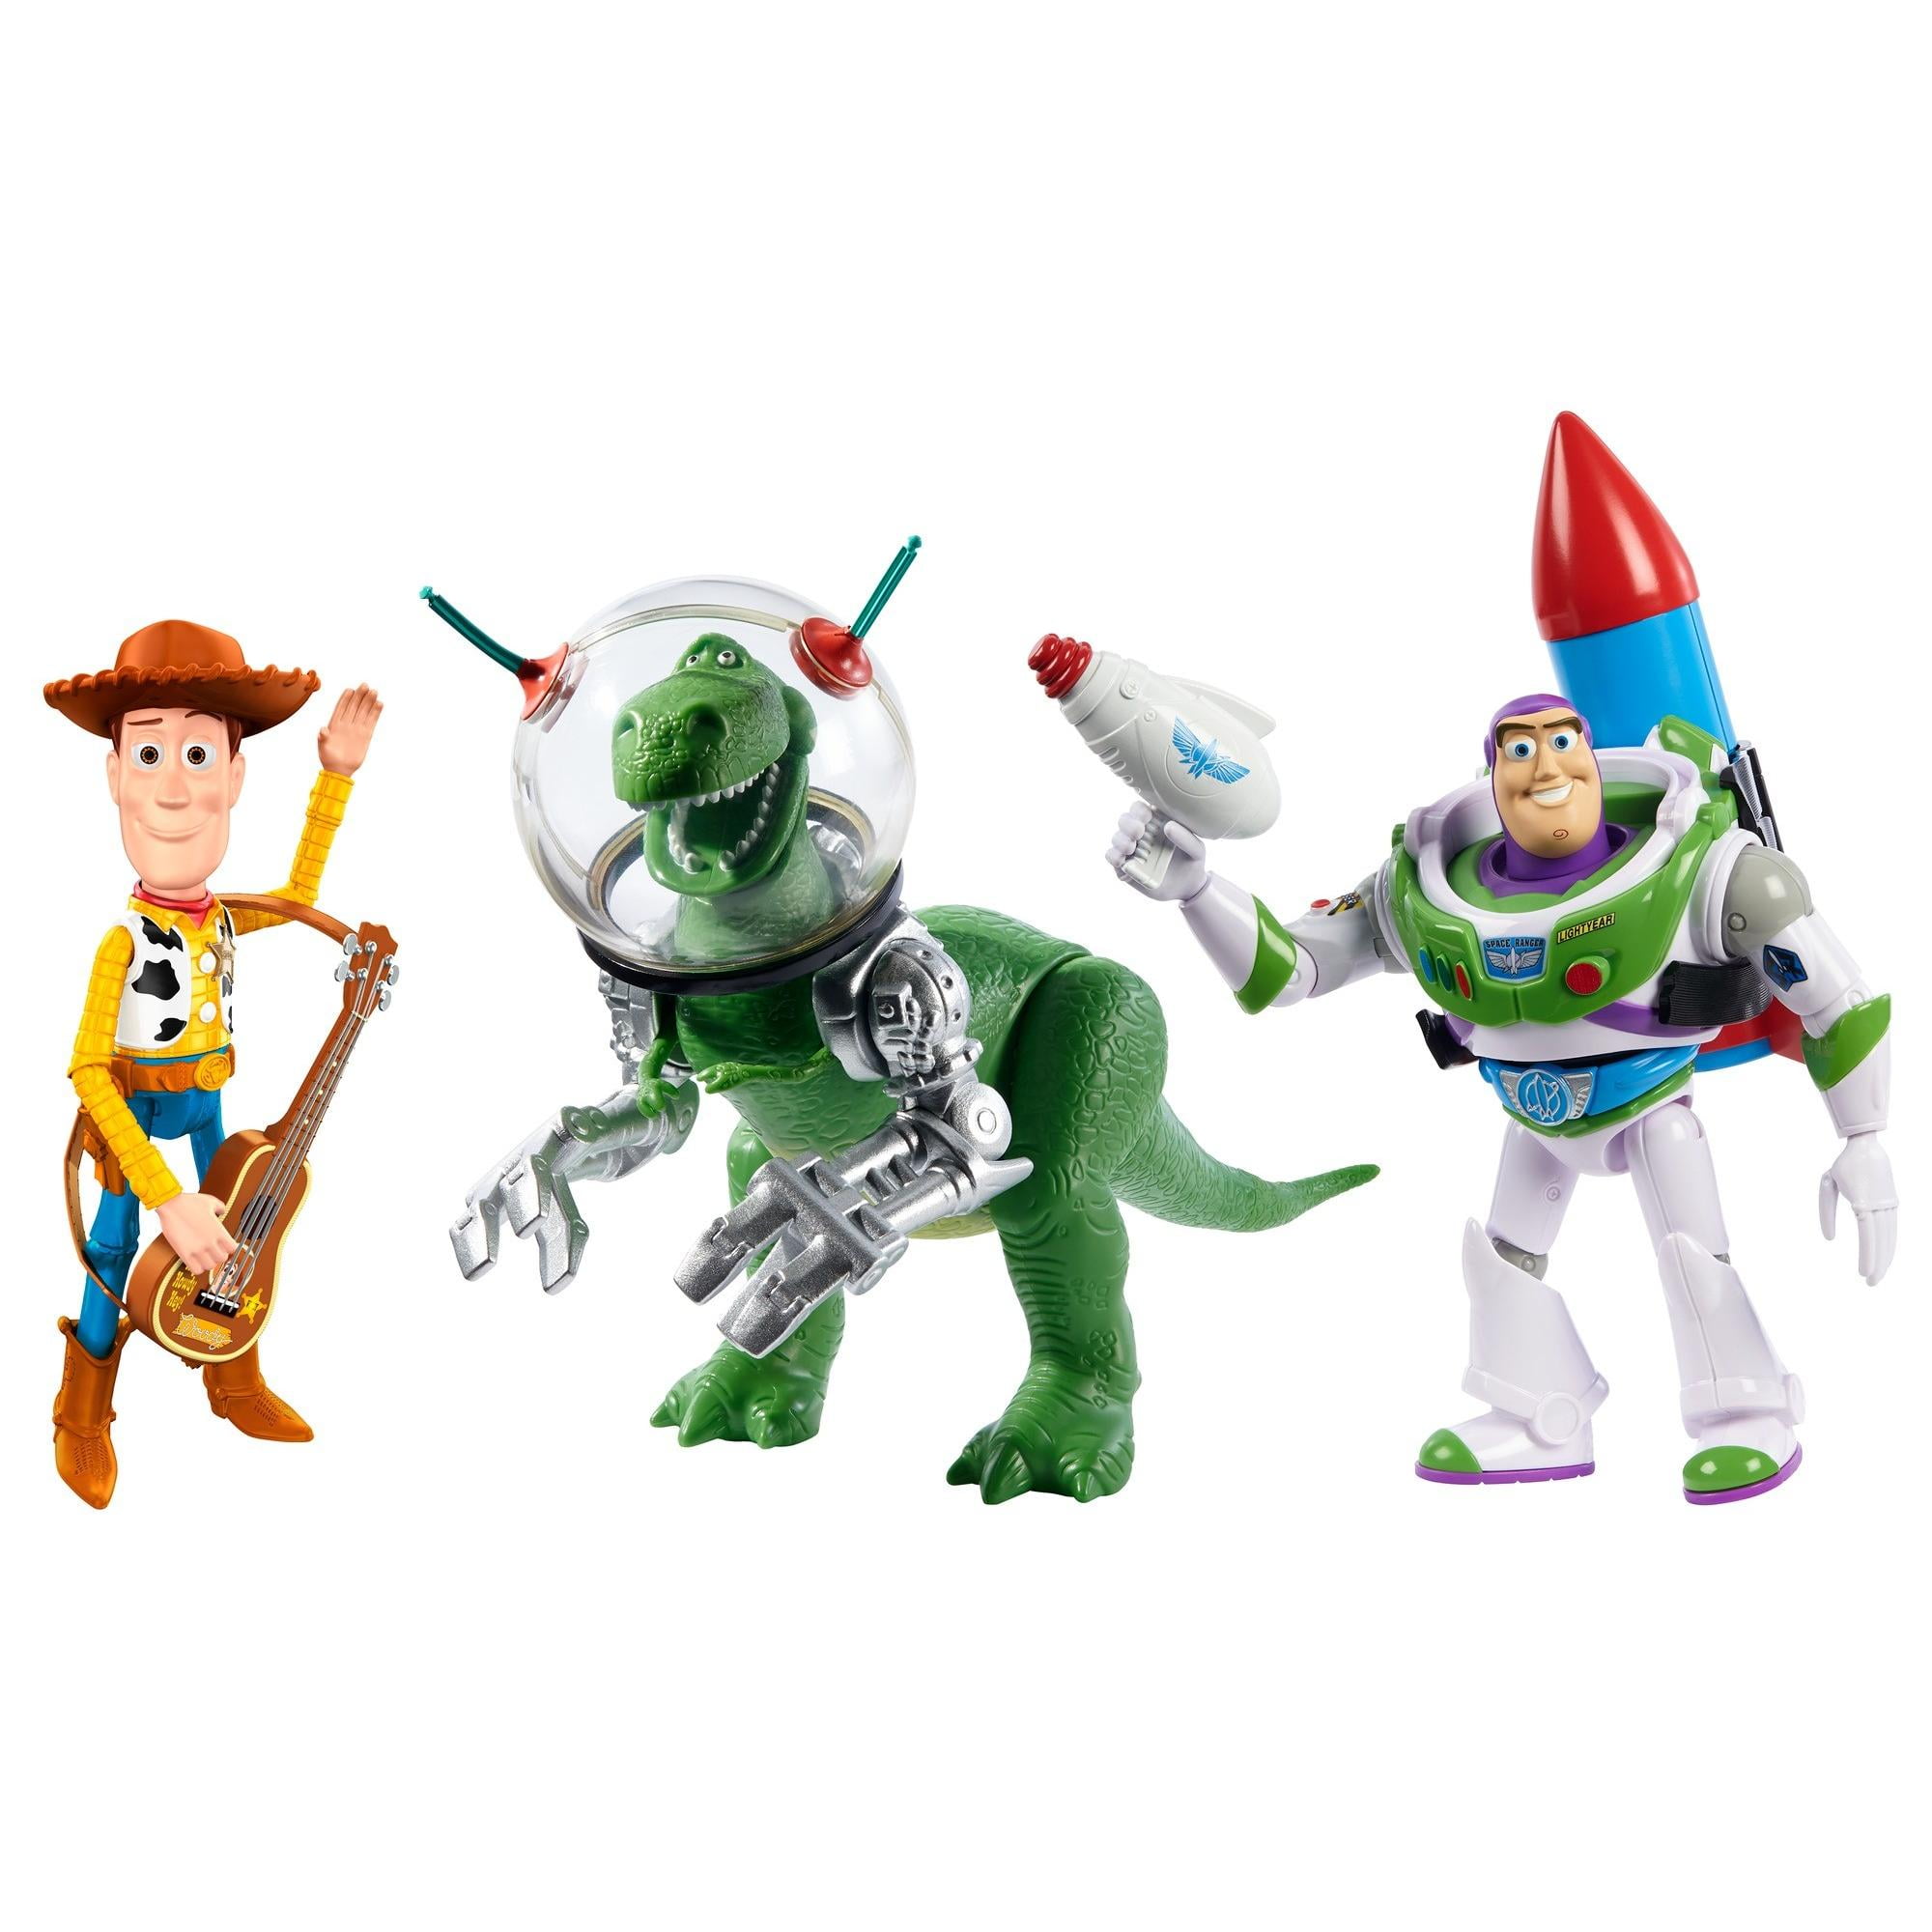 Disneypixar Toy Story 25th Anniversary Character Figures Character